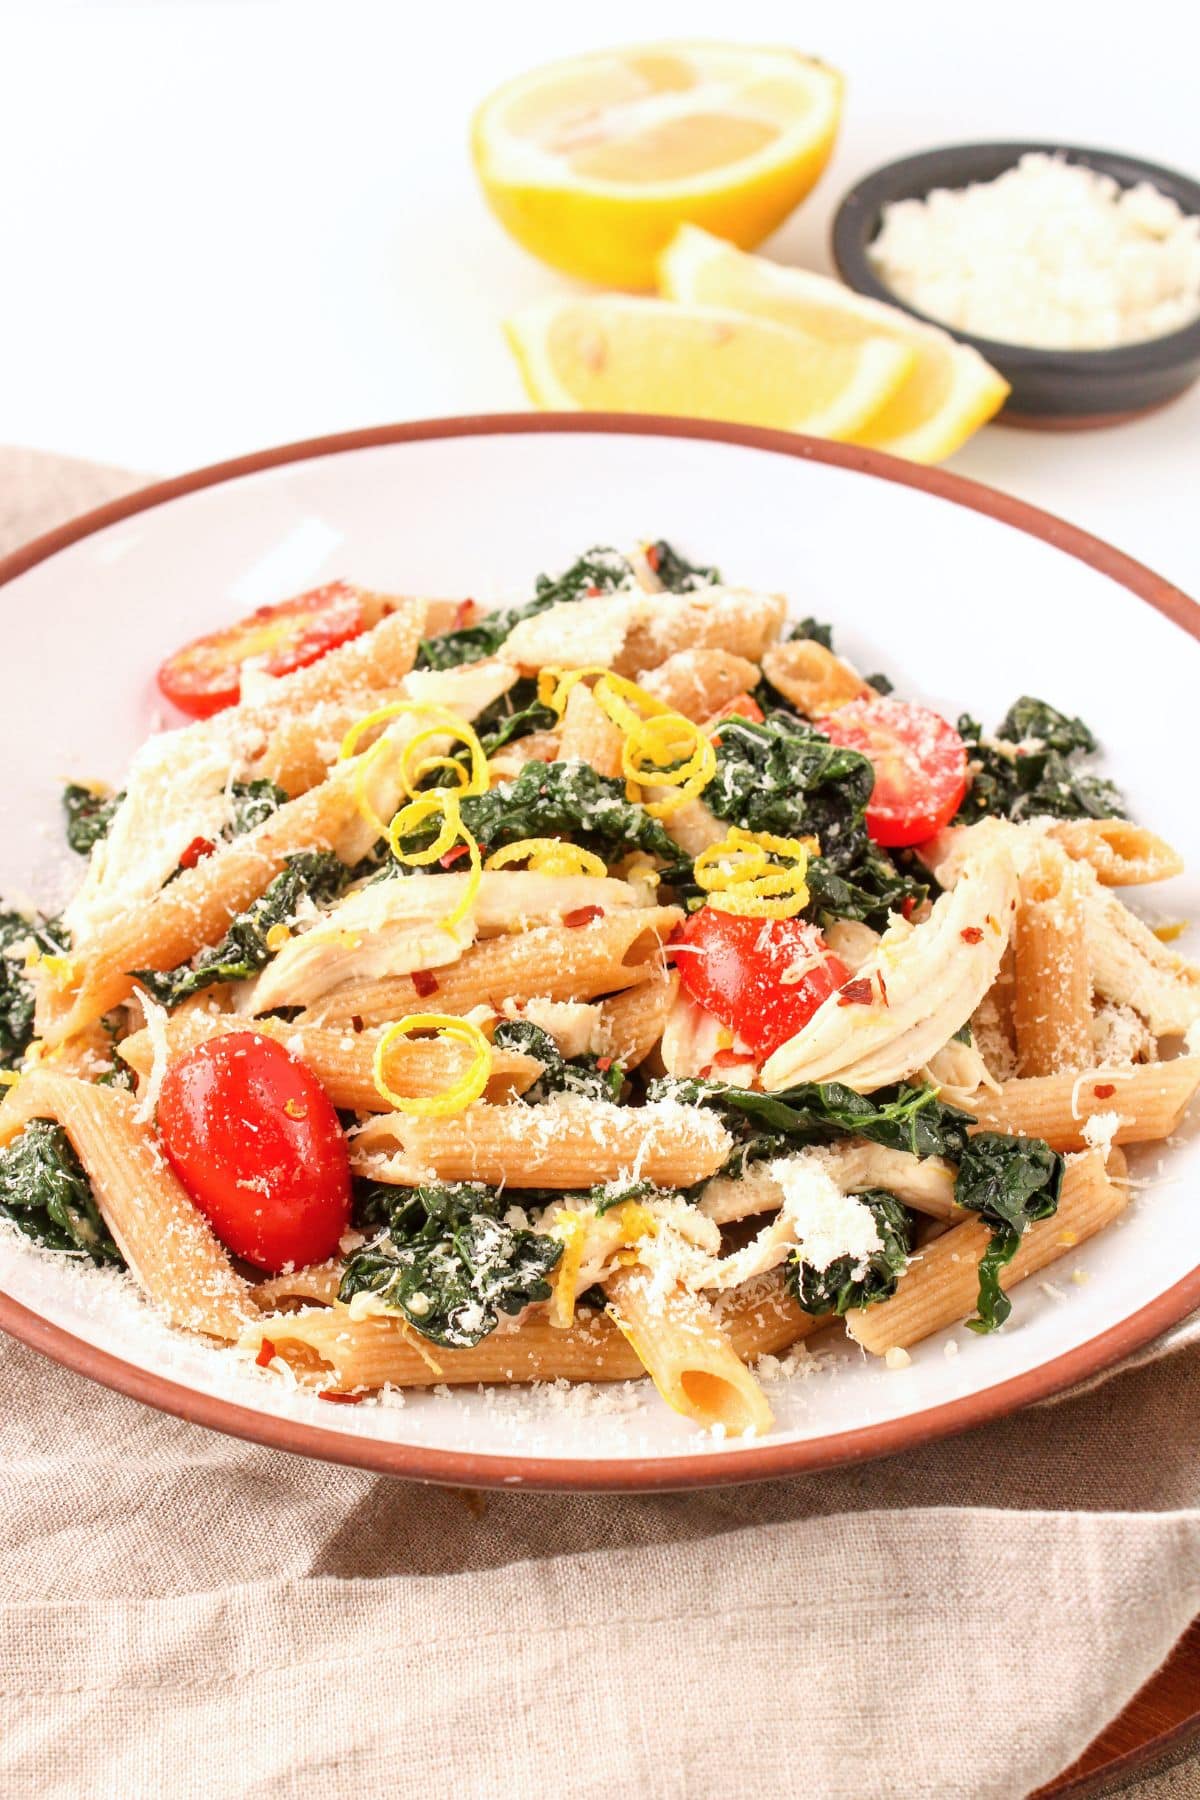 lemon kale pasta with shredded chicken, parmesan cheese, and tomatoes